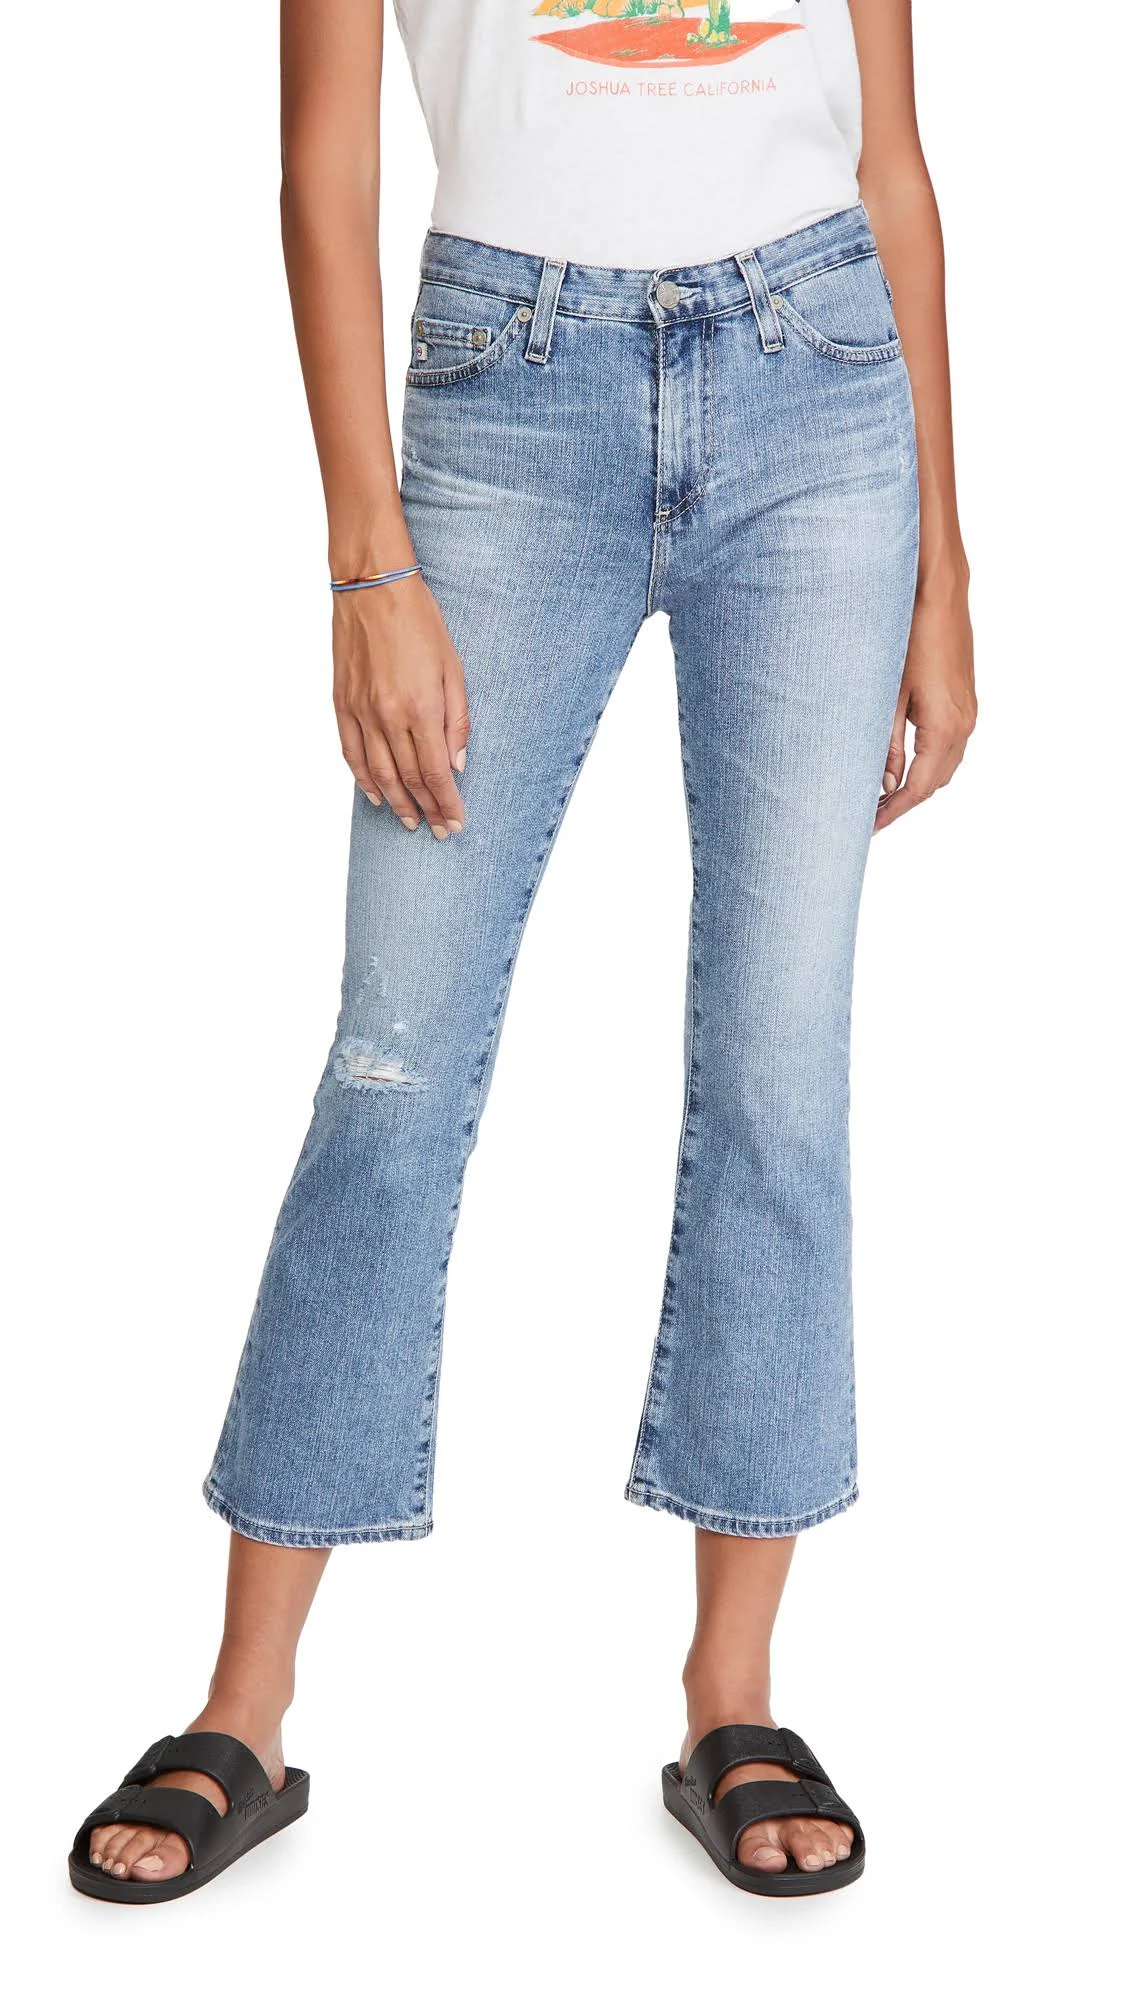 Ag Jodi Crop Jeans 22 Years Succession 27